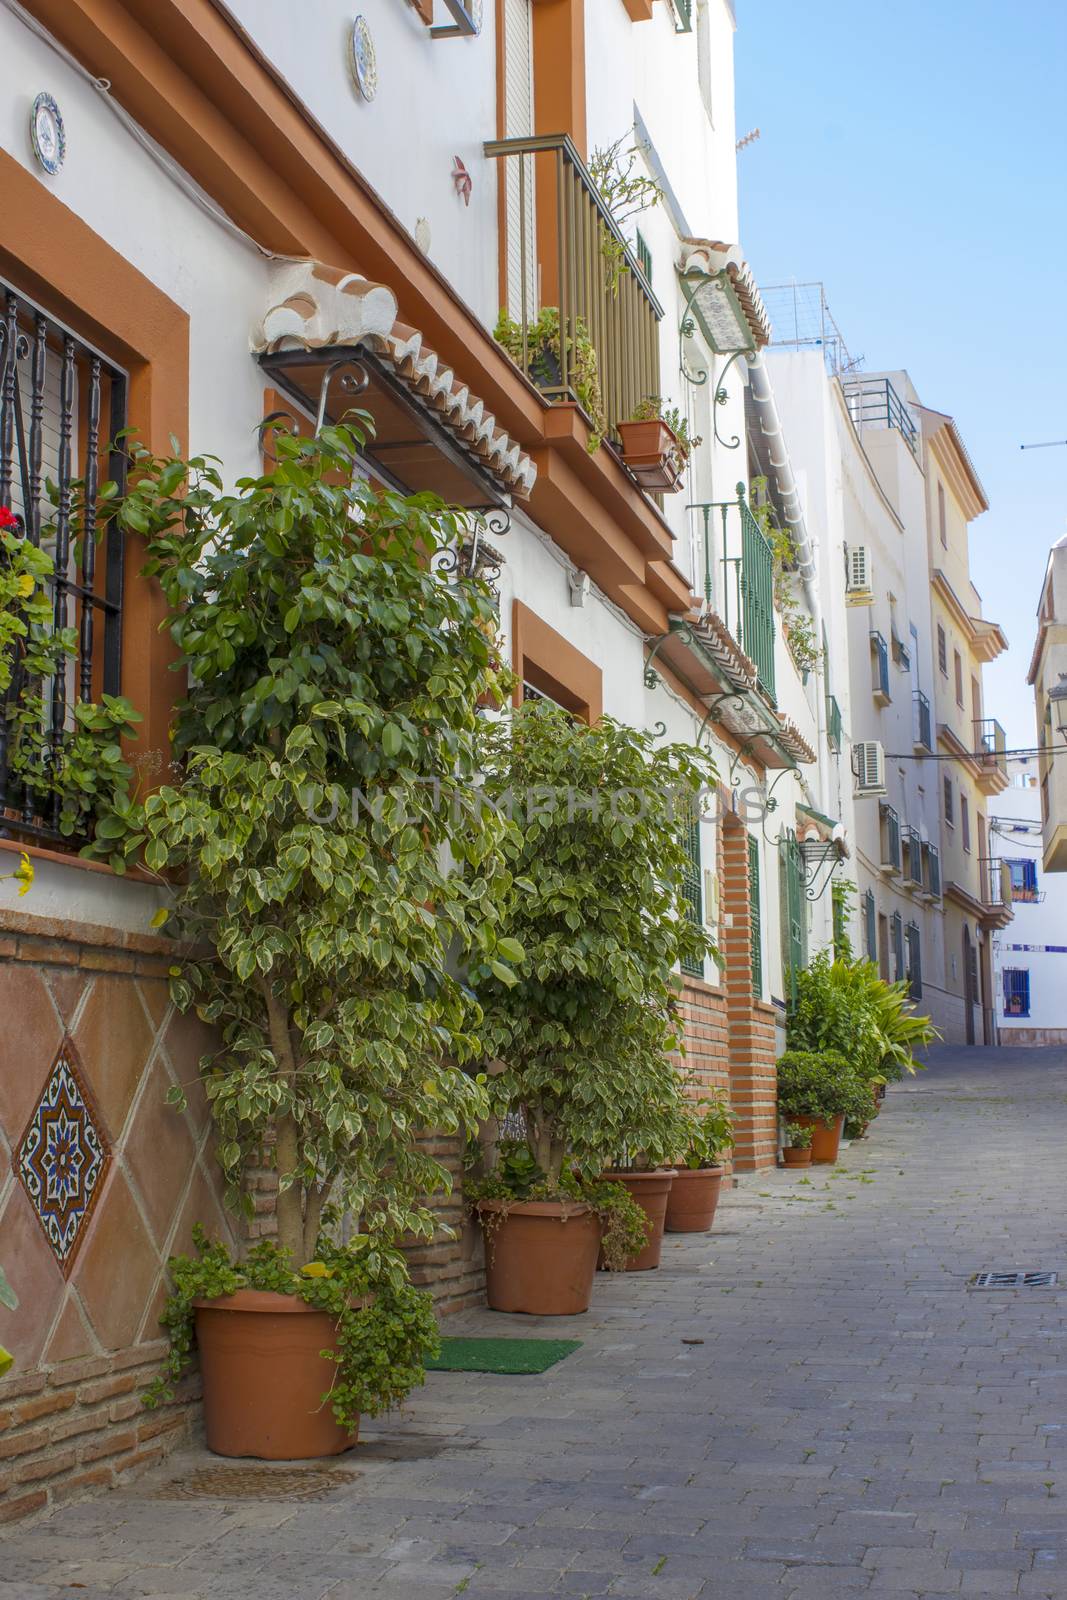 Street in Almunecar Andalusia, Spain by miradrozdowski